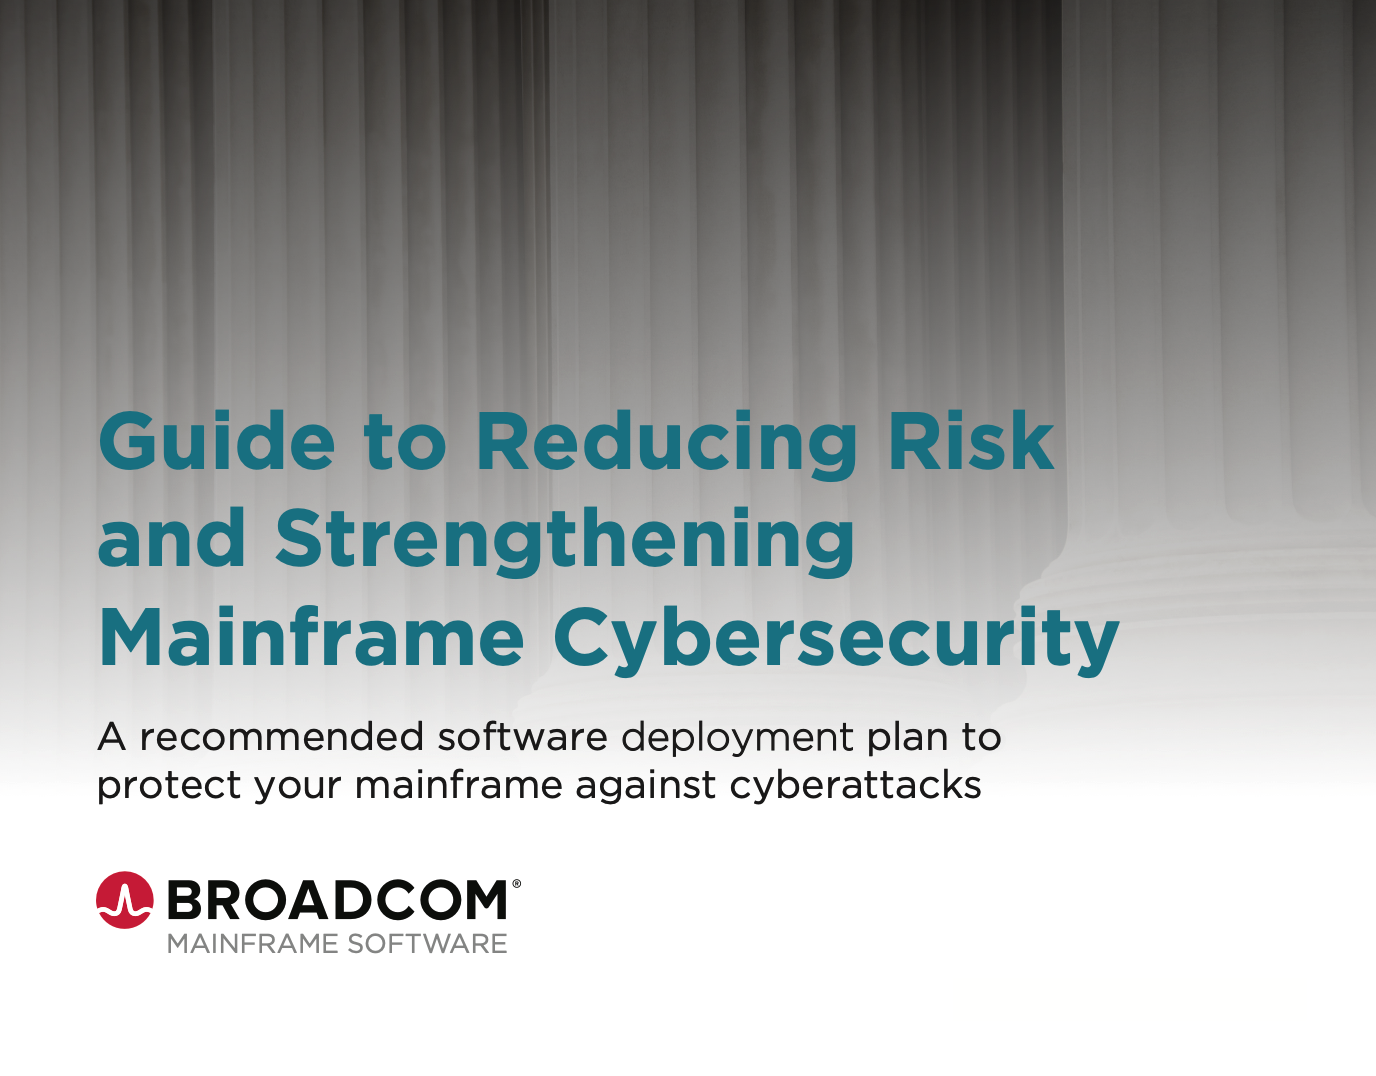 MSD_SEC_Guide to Reducing Risk and Strengthening Mainframe Cybersecurity Thumbnail